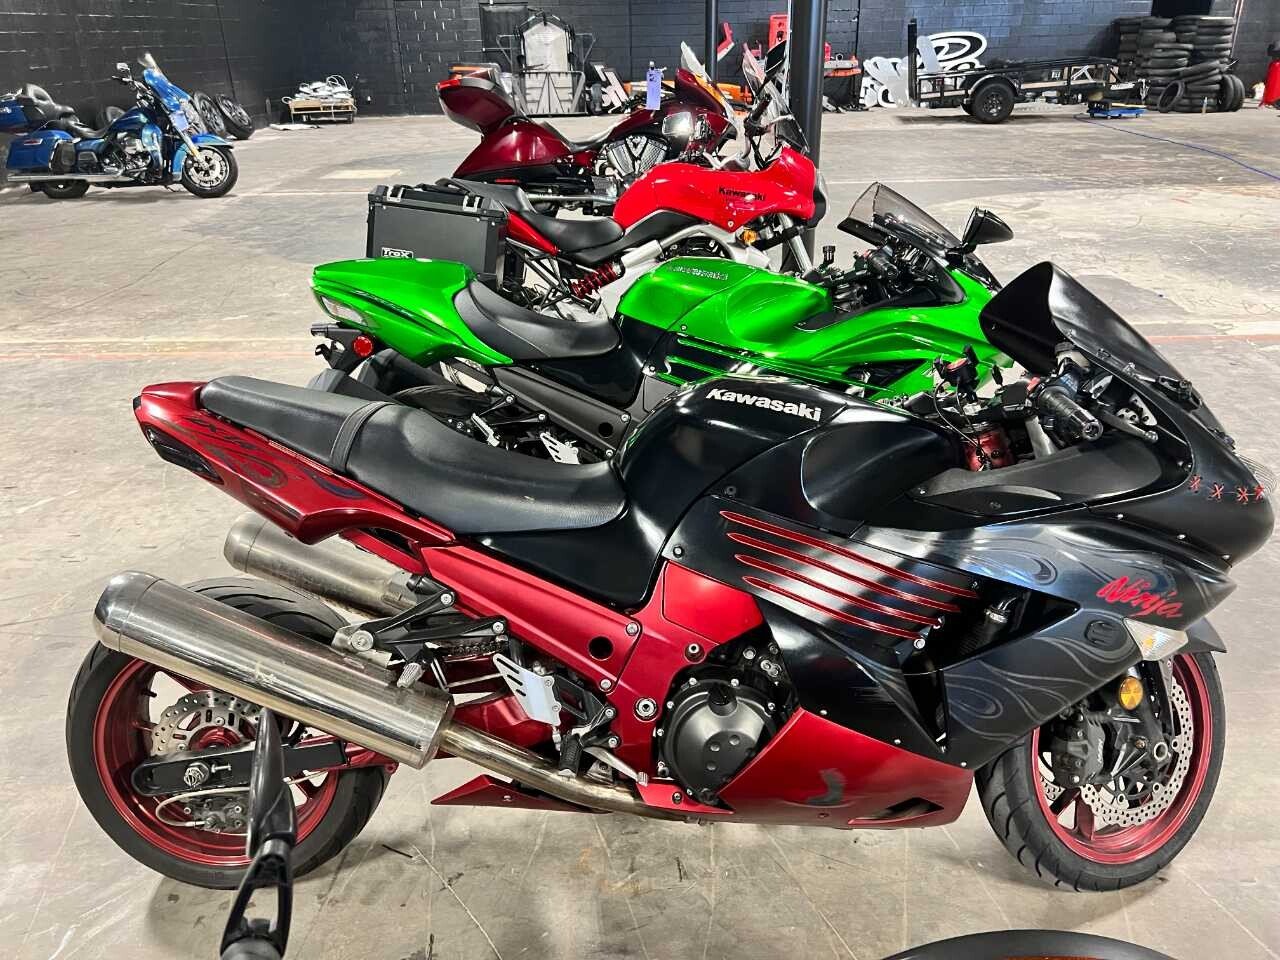 Motorcycles for Sale near Spring, Texas - Motorcycles on Autotrader